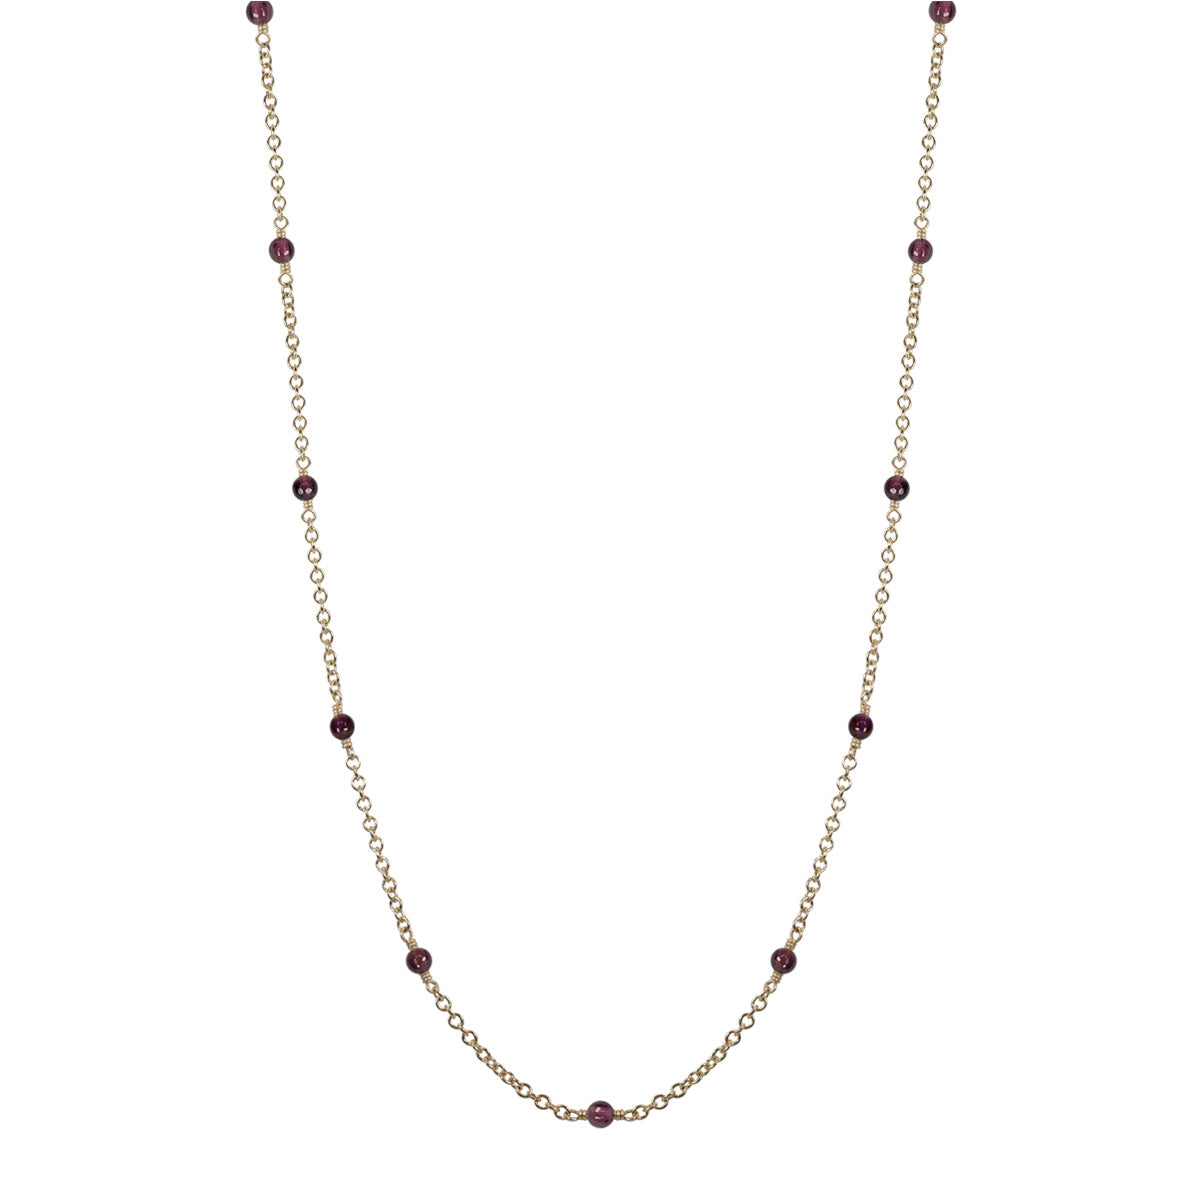 10K Gold Simple Beaded Chain with Garnet 18 inch